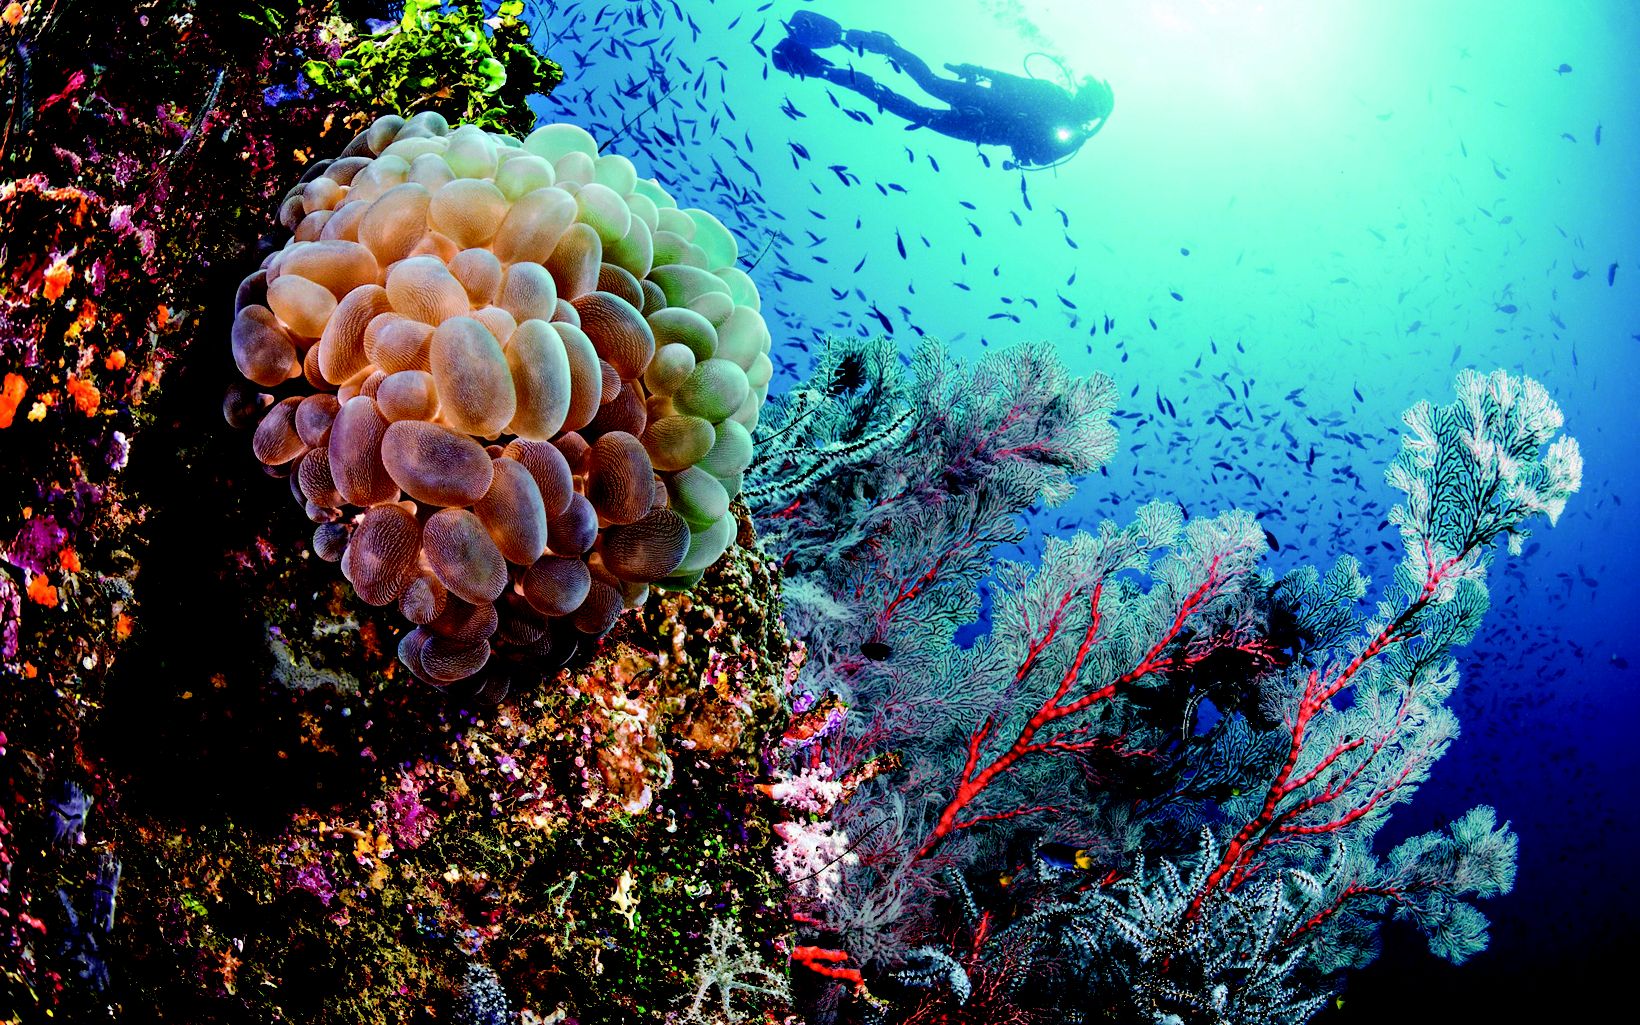 Underwater view at Two Tree dive site, Raja Ampat, Indonesia, with vibrant corals in the foreground and a diver near the water's surface in the background.